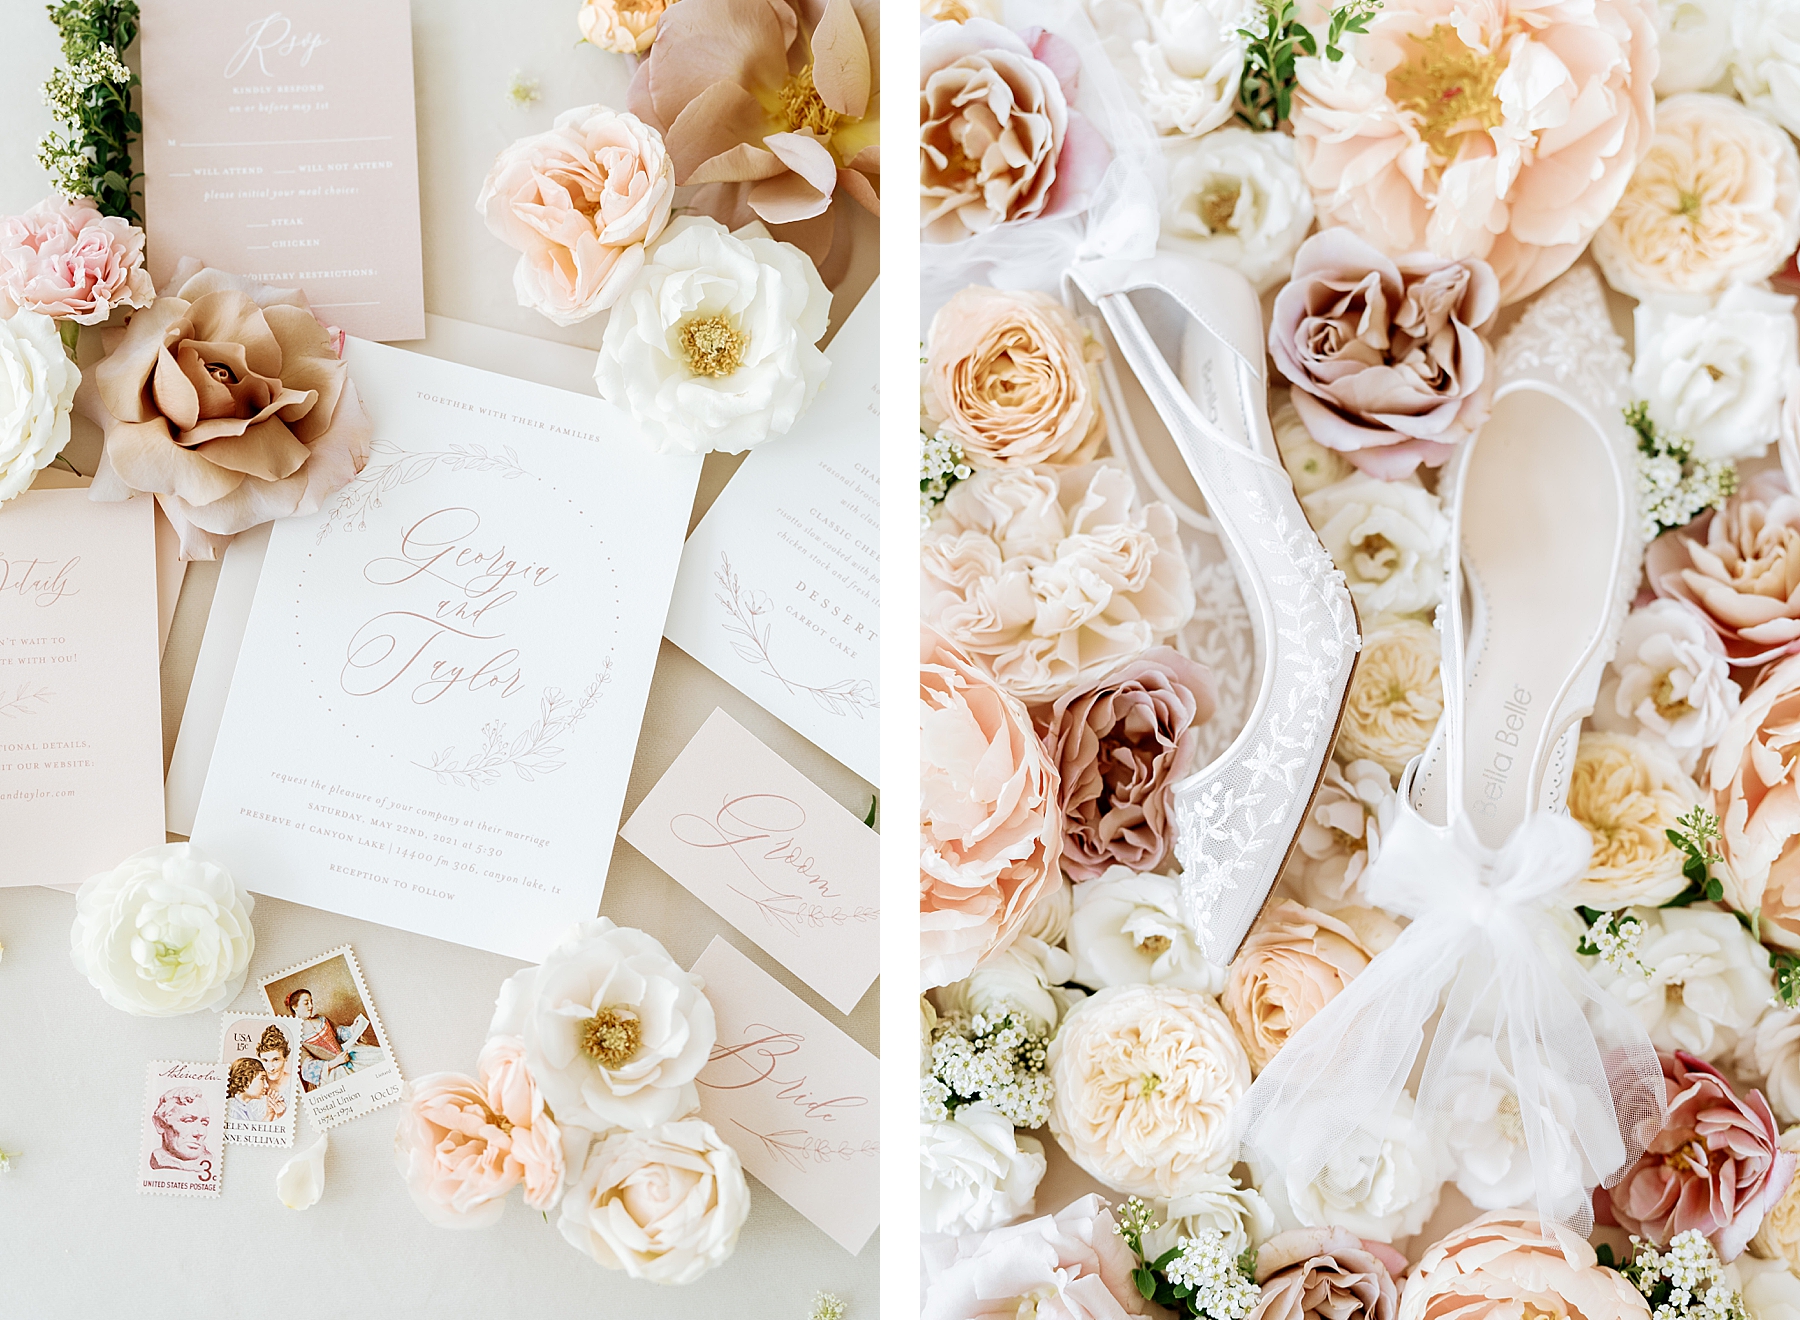 Wedding stationery and bridal shoes surrounded by florals in wedding detail photos | Reiley and Rose | Central Texas Wedding Floral Designer | The Preserve at Canyon Lake Wedding Venue | classic wedding inspiration, chic wedding, pink wedding color scheme | via reileyandrose.com